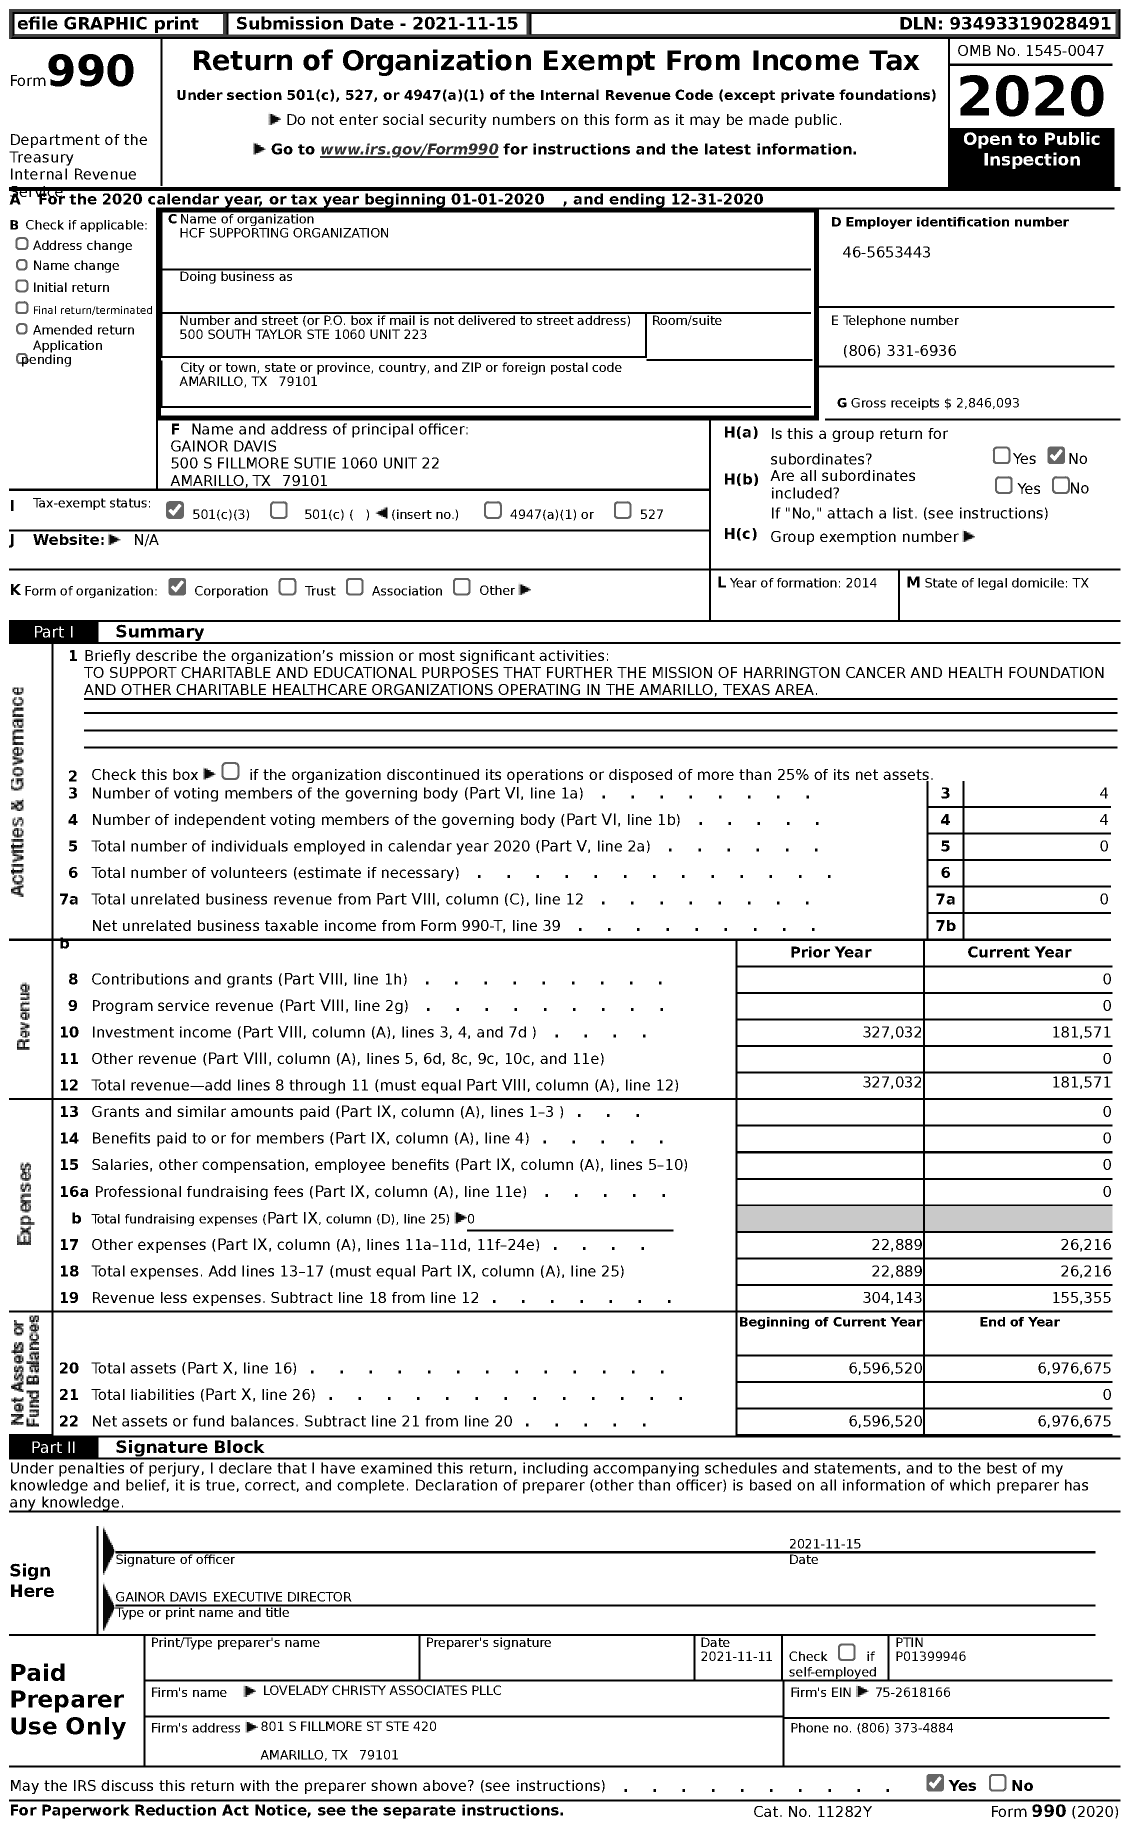 Image of first page of 2020 Form 990 for HCF Supporting Organization